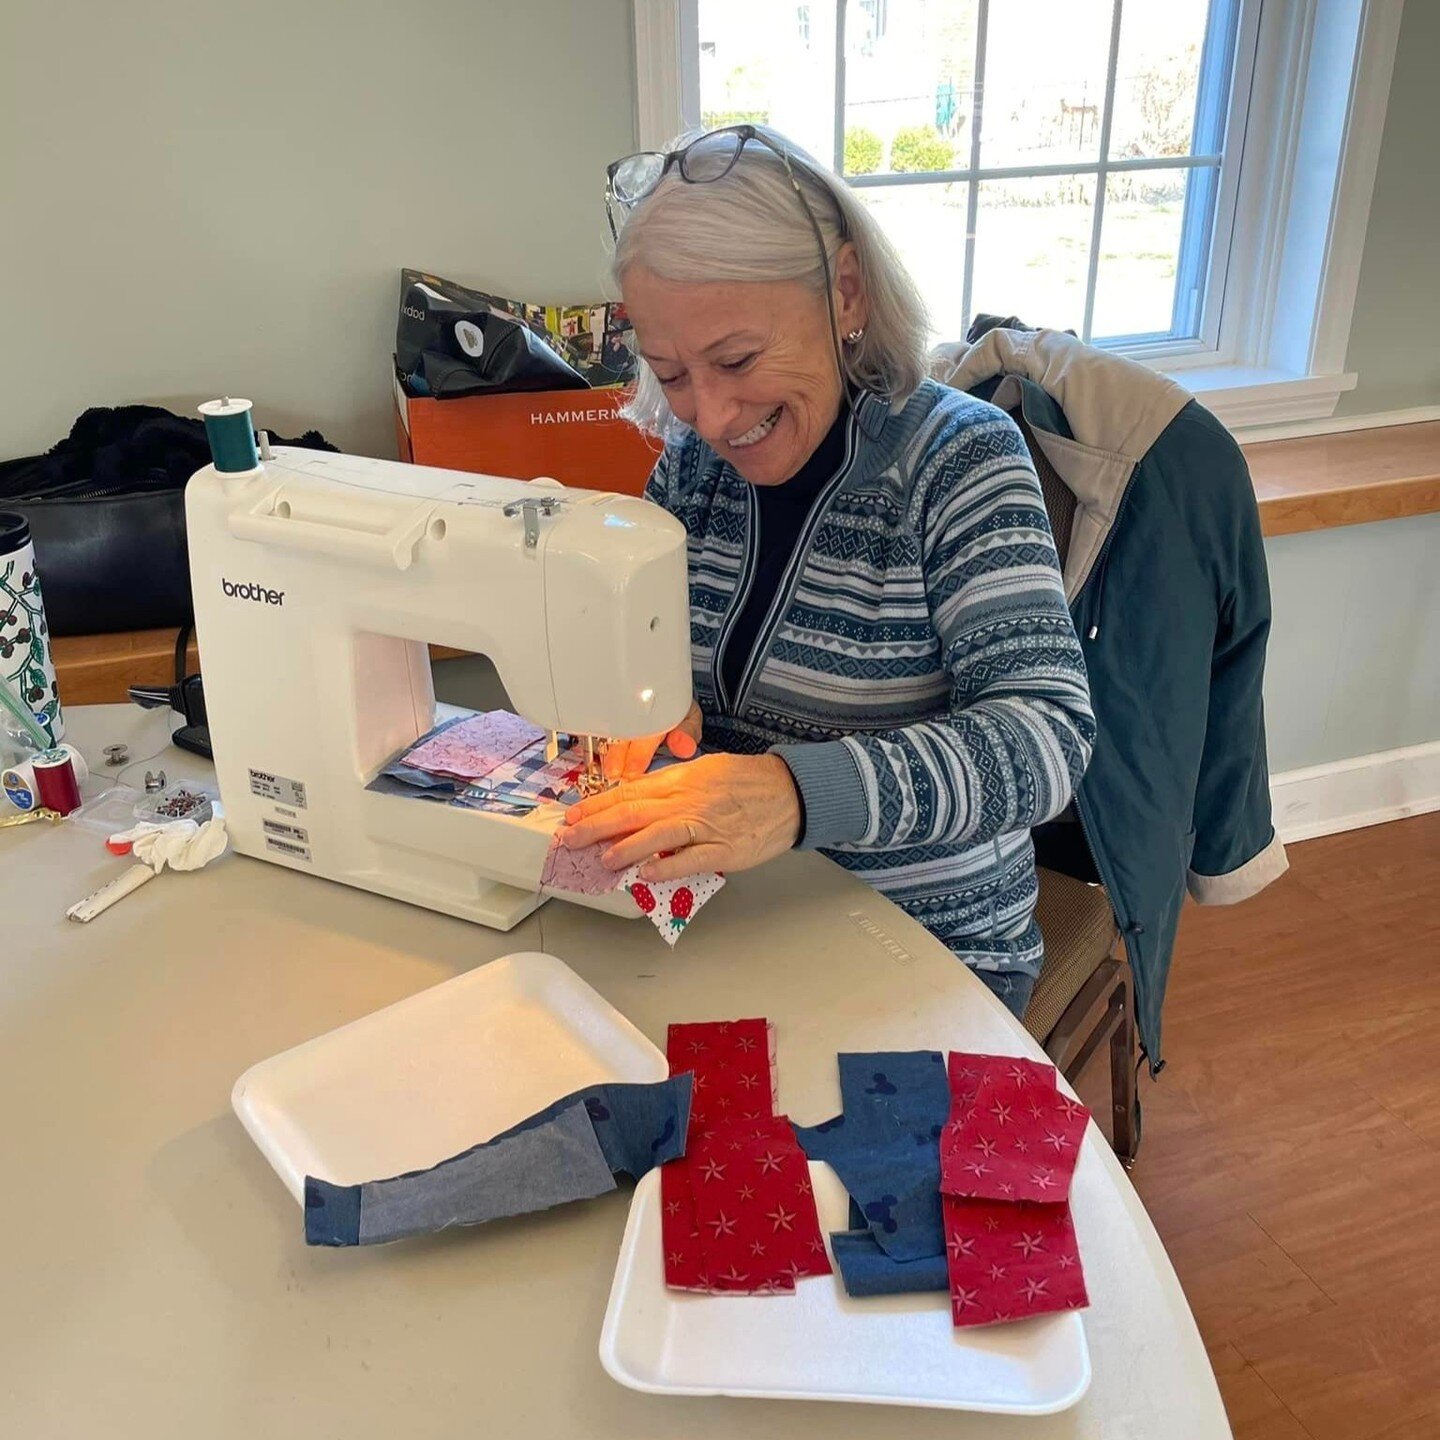 Threads of Love! Join us Saturday, May 20 any time from 9am-5pm. Bring your sewing machine, foot pedal &amp; cord, scissors, and your own lunch.  All skill levels welcome! 
Contact Clareklein@gmail.com  or text/call 440-655-7533.